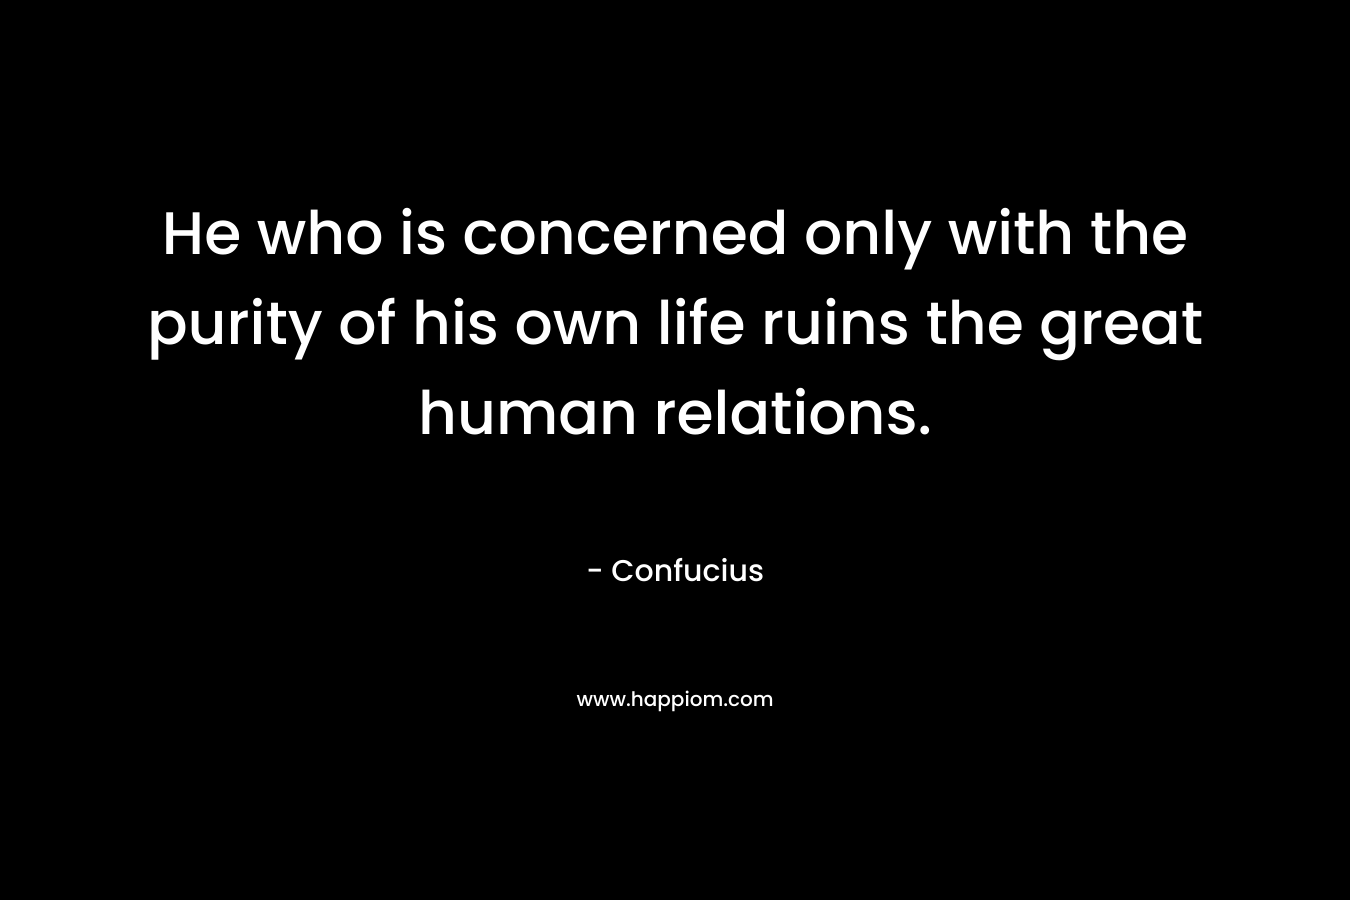 He who is concerned only with the purity of his own life ruins the great human relations.